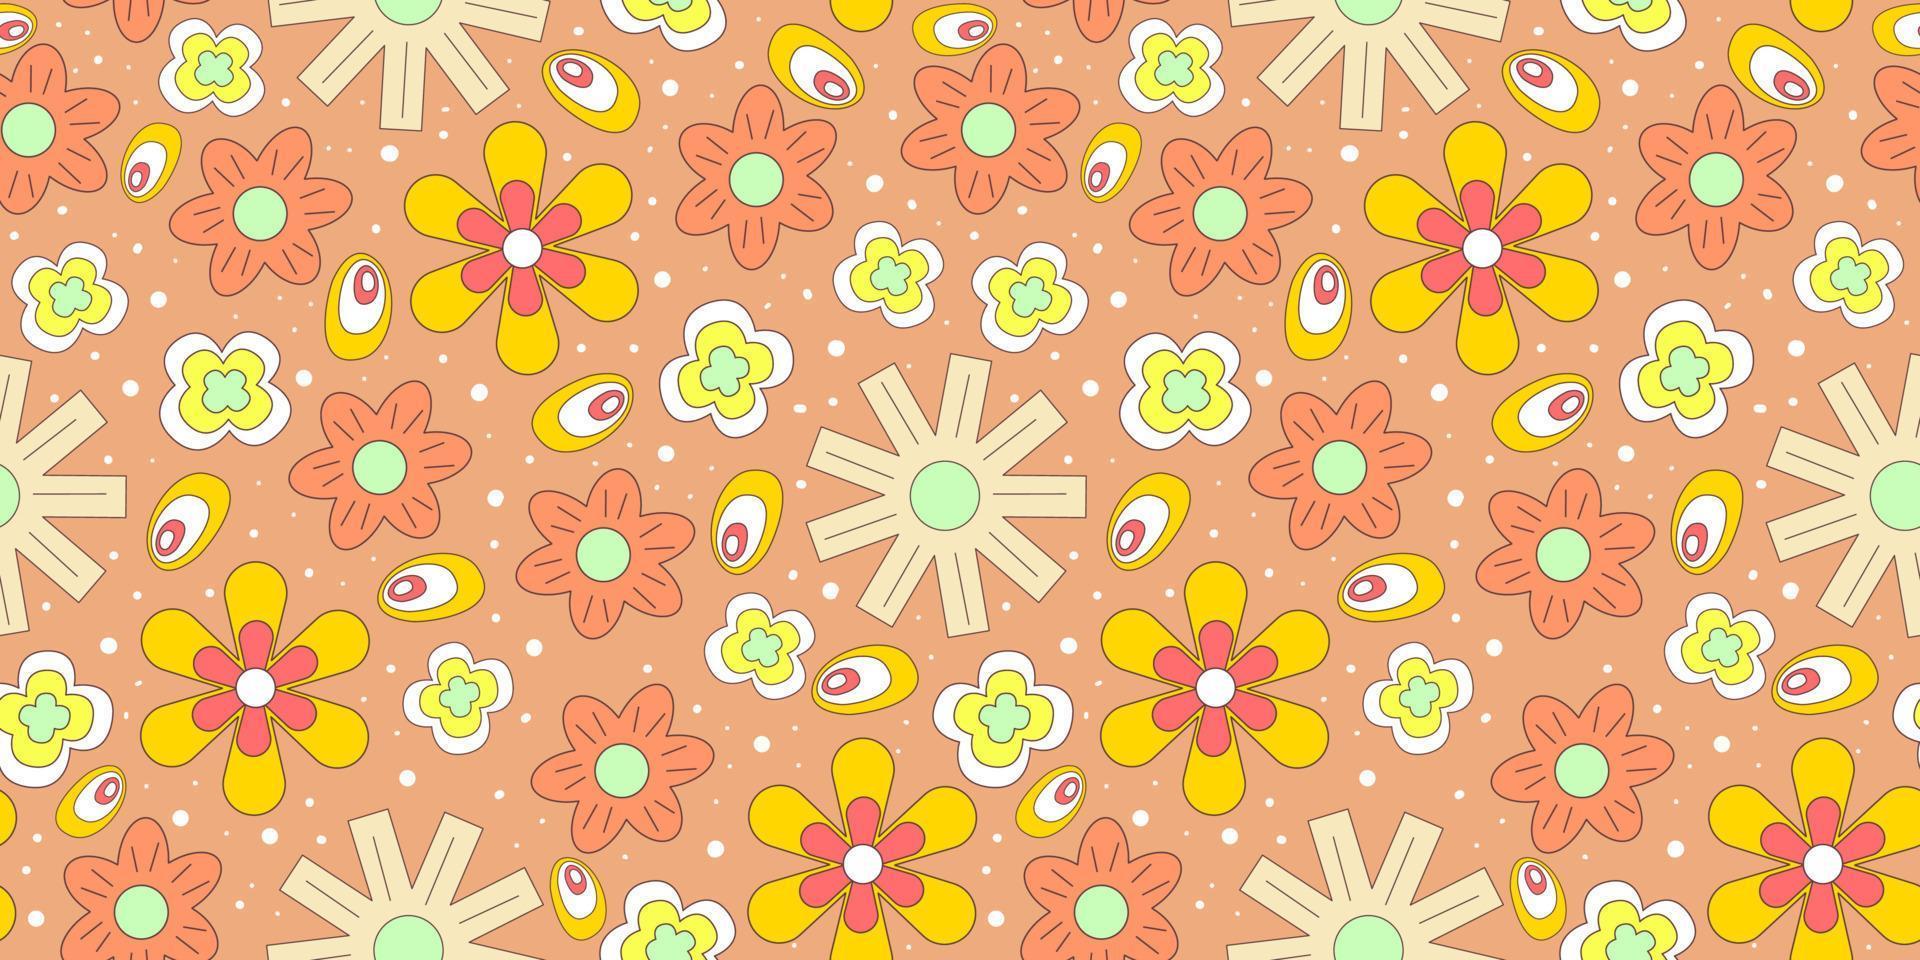 Seamless pattern with retro flowers 70. Psychedelic groovy geometric pattern with flowers. Daisy for hippie background. Flat vector illustration. Psychedelic wallpaper